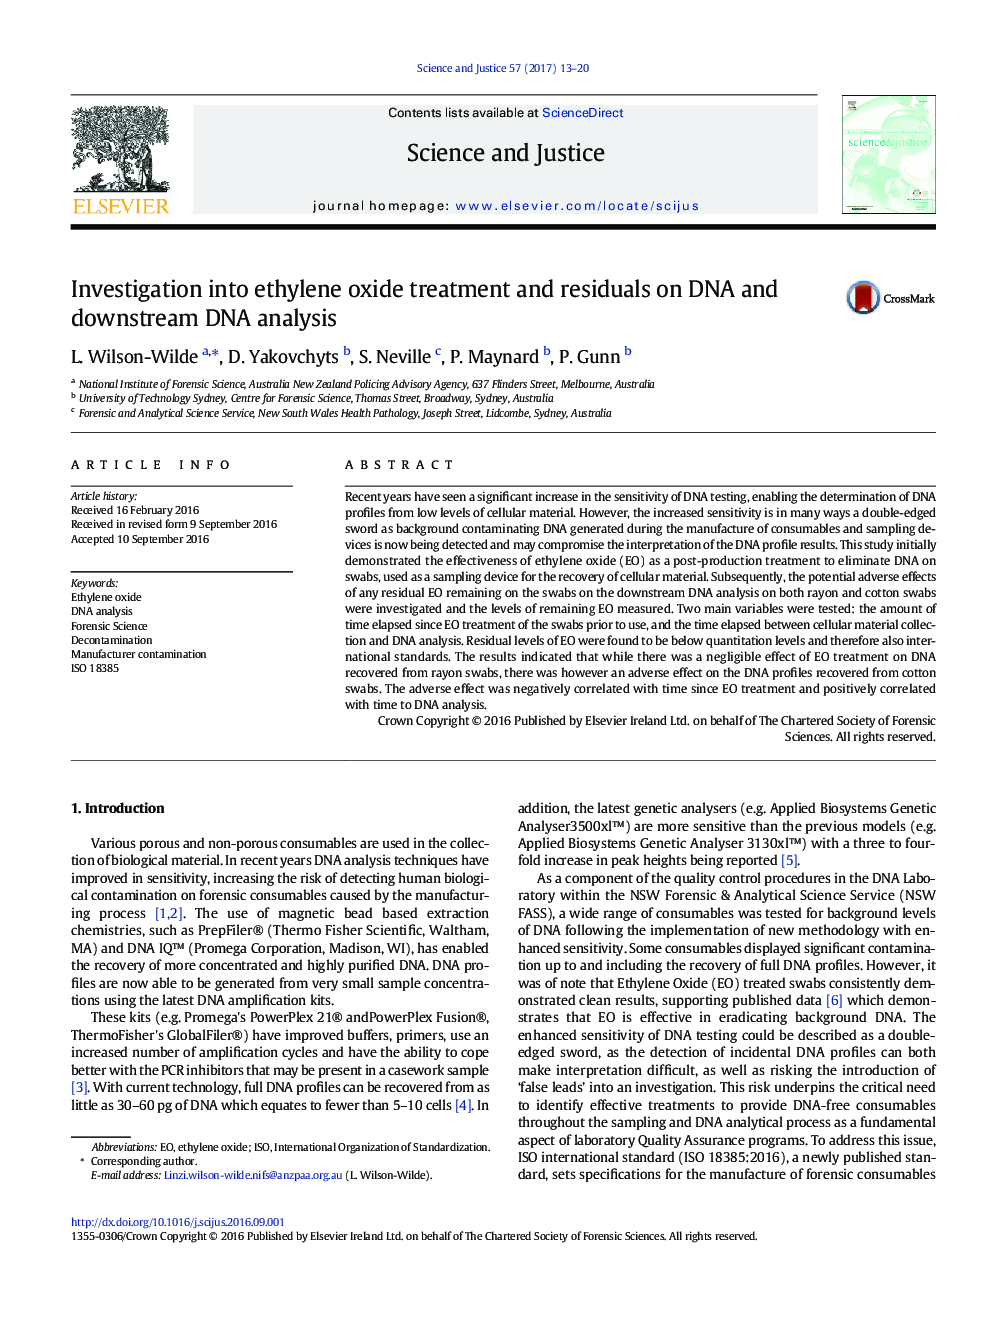 Investigation into ethylene oxide treatment and residuals on DNA and downstream DNA analysis